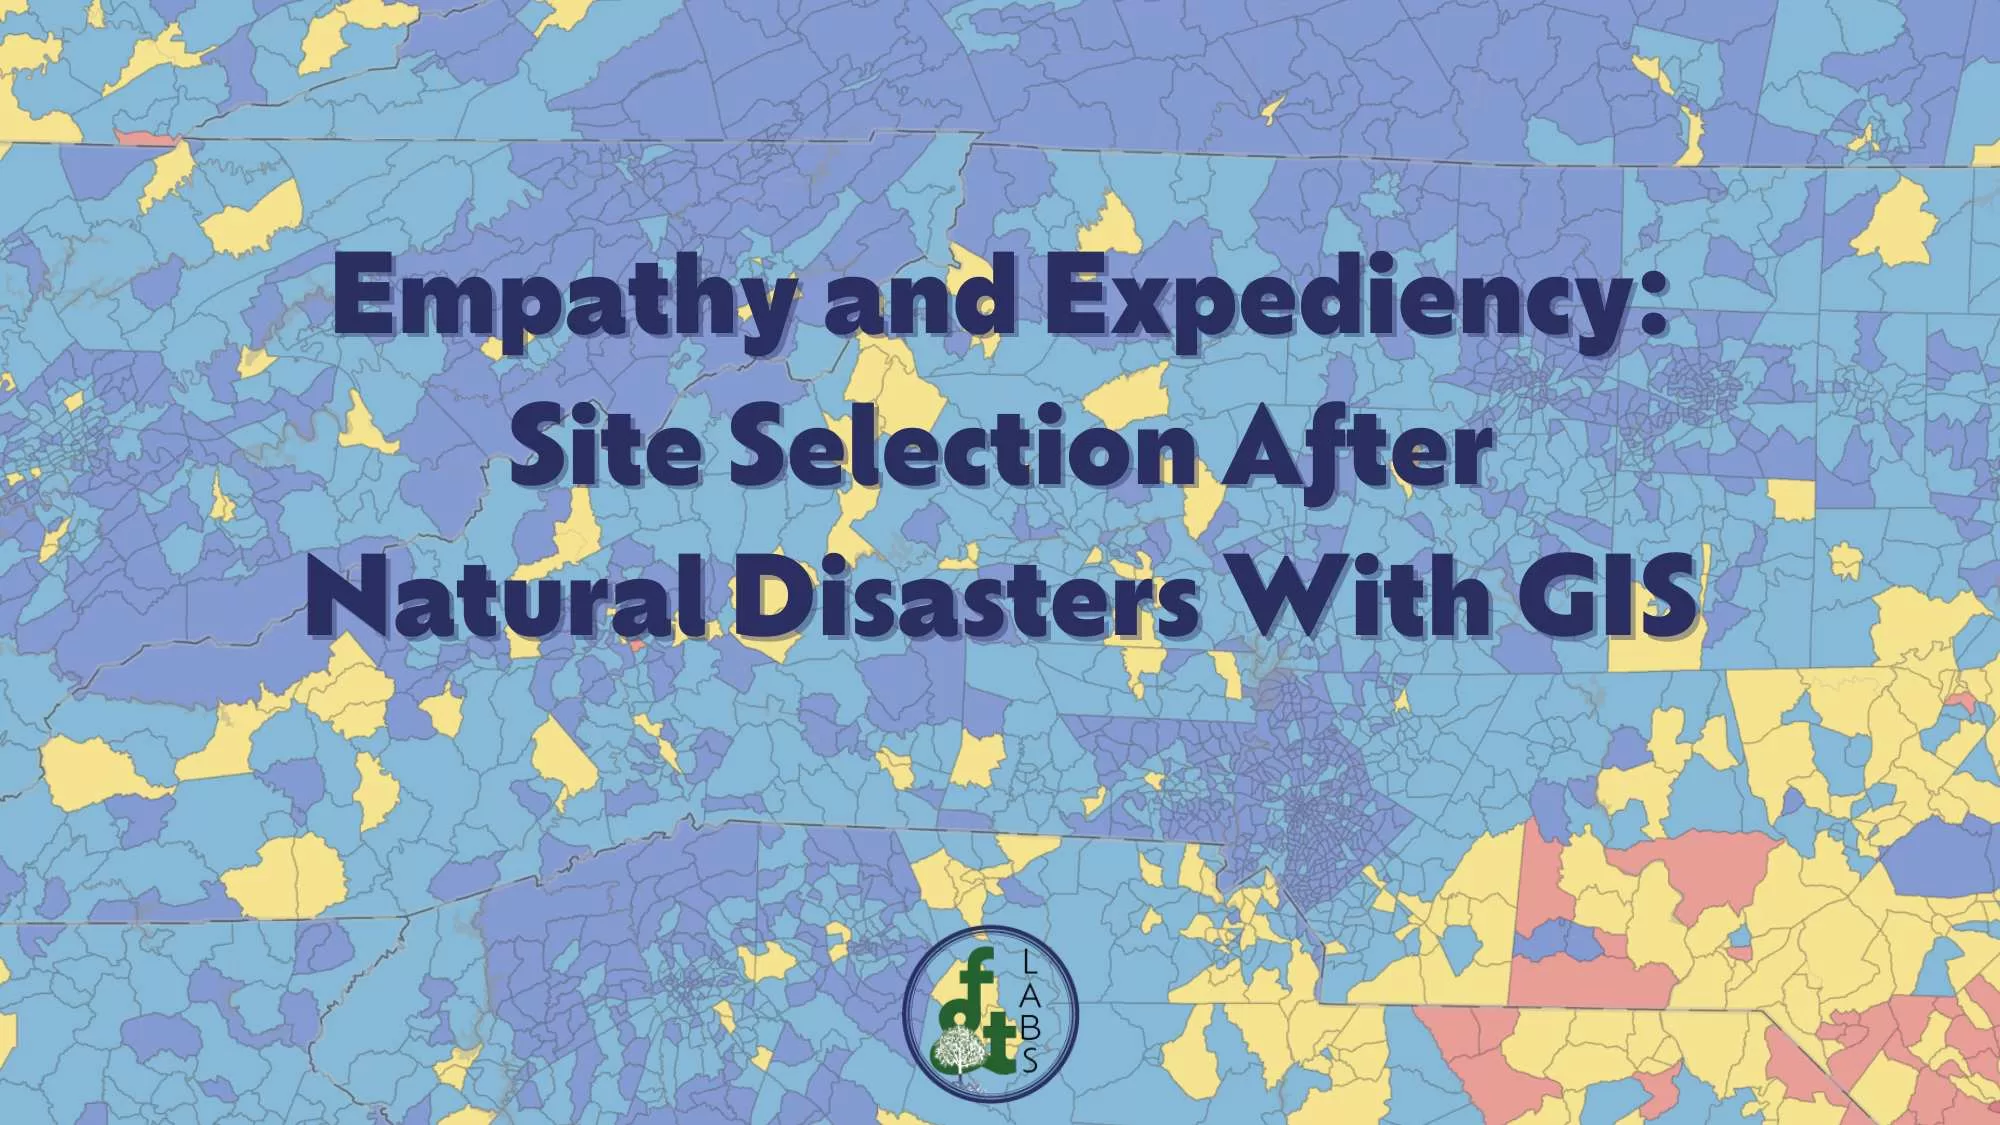 GIS Site Selection After Natural Disasters image says Empathy and Expediency Site Selection After Natural Disasters With GIS